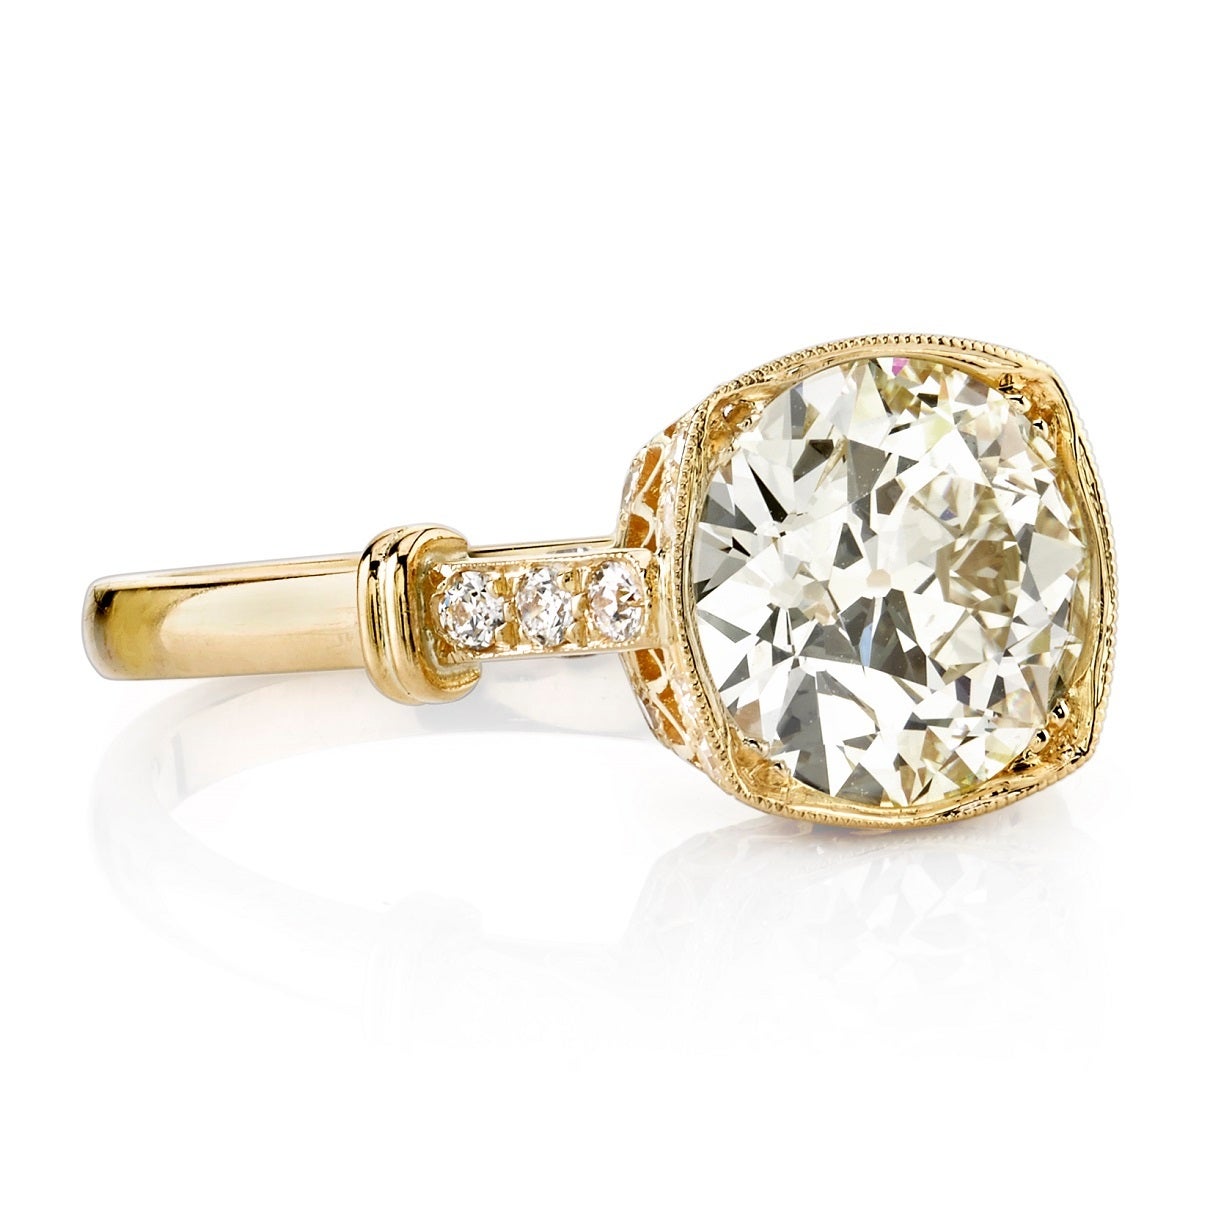 2.04ct OP/VVS2 GIA certified old European cut diamond set in a handcrafted 18K yellow gold mounting. A classic design featuring a detailed gallery, illusion top, and architectural elements.